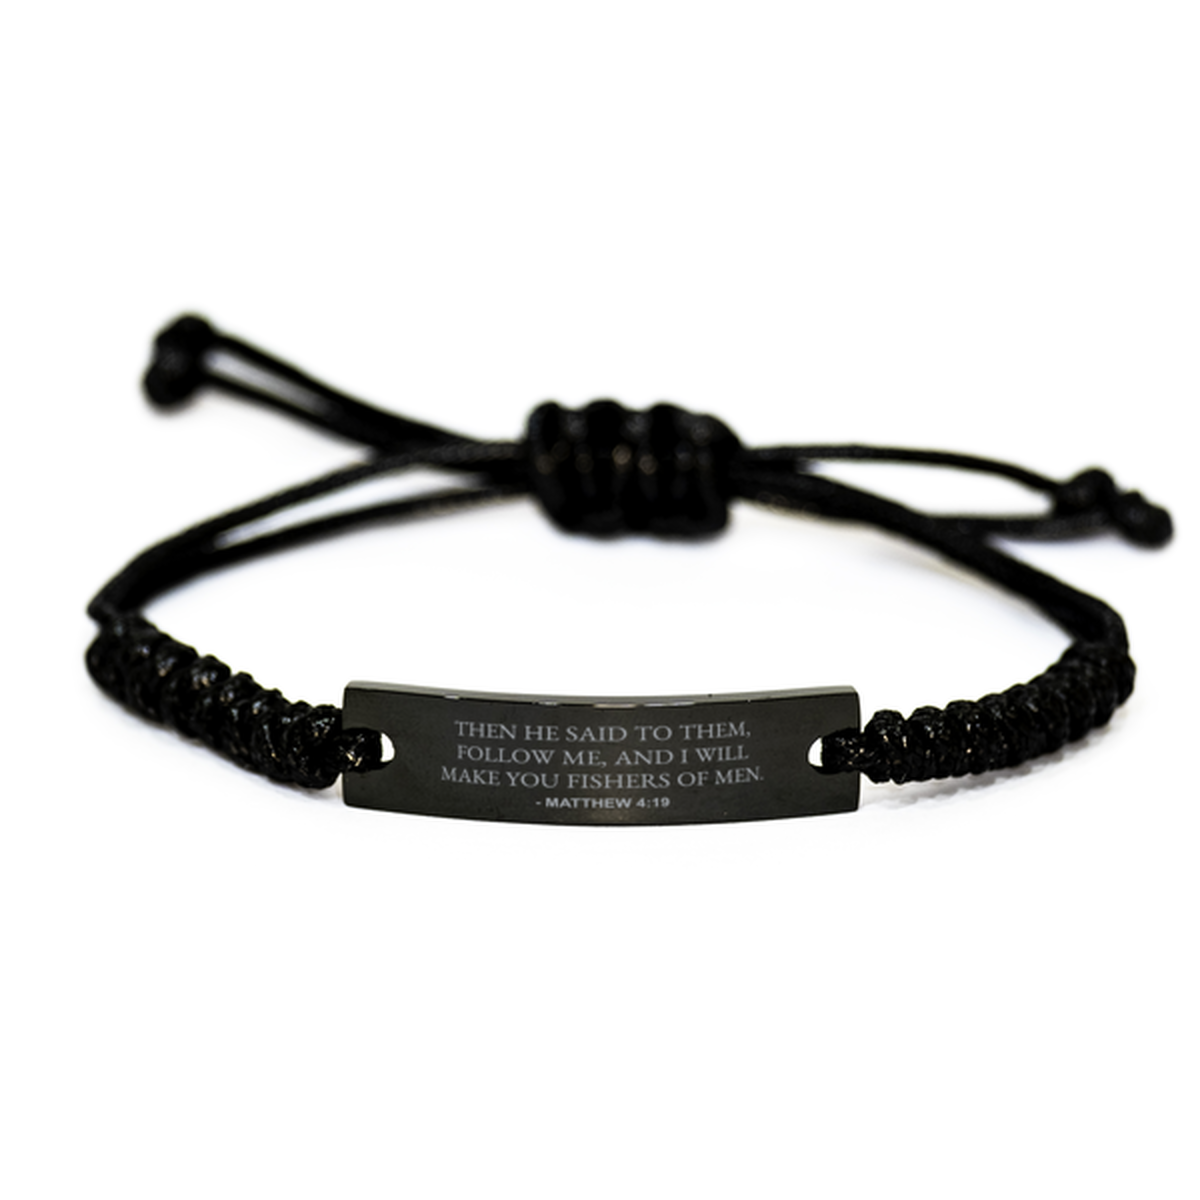 Bible Verse Rope Bracelet, Matthew 4:19 Then He Said To Them, Follow Me, And I Will, Christian Encouraging Gifts For Men Women Boys Girls